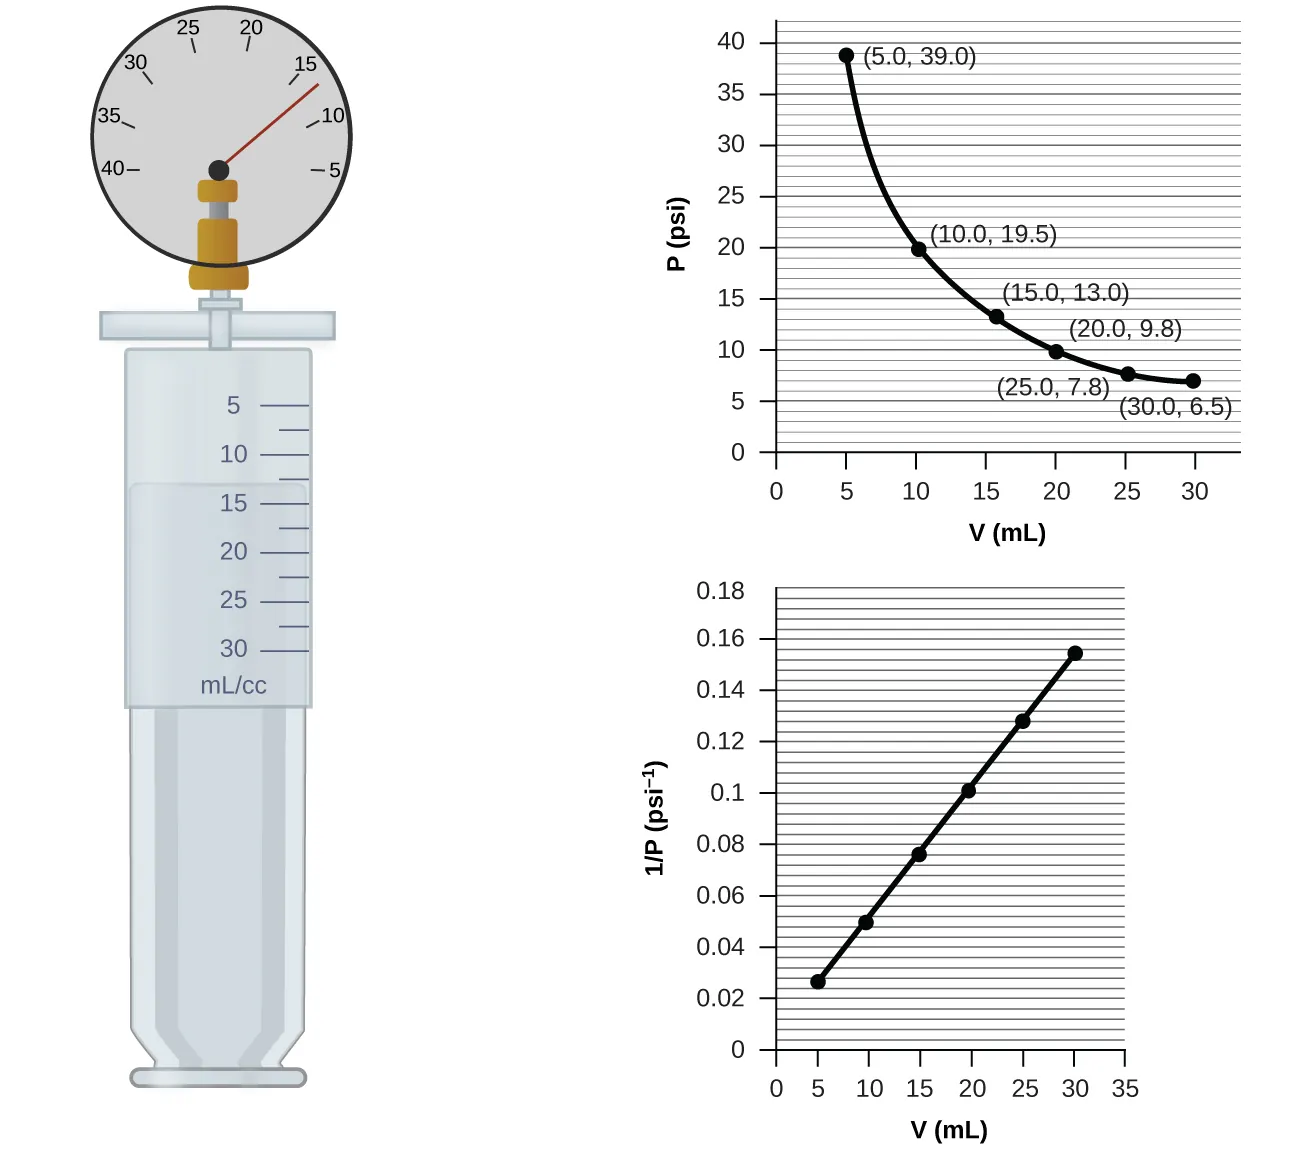 This figure contains a diagram and two graphs. The diagram shows a syringe labeled with a scale in m l or c c with multiples of 5 labeled beginning at 5 and ending at 30. The markings halfway between these measurements are also provided. Attached at the top of the syringe is a pressure gauge with a scale marked by fives from 40 on the left to 5 on the right. The gauge needle rests between 10 and 15, slightly closer to 15. The syringe plunger position indicates a volume measurement about halfway between 10 and 15 m l or c c. The first graph is labeled “V ( m L )” on the horizontal axis and “P ( p s i )” on the vertical axis. Points are labeled at 5, 10, 15, 20, and 25 m L with corresponding values of 39.0, 19.5, 13.0, 9.8, and 6.5 p s i. The points are connected with a smooth curve that is declining at a decreasing rate of change. The second graph is labeled “V ( m L )” on the horizontal axis and “1 divided by P ( p s i )” on the vertical axis. The horizontal axis is labeled at multiples of 5, beginning at zero and extending up to 35 m L. The vertical axis is labeled by multiples of 0.02, beginning at 0 and extending up to 0.18. Six points indicated by black dots on this graph are connected with a black line segment showing a positive linear trend.